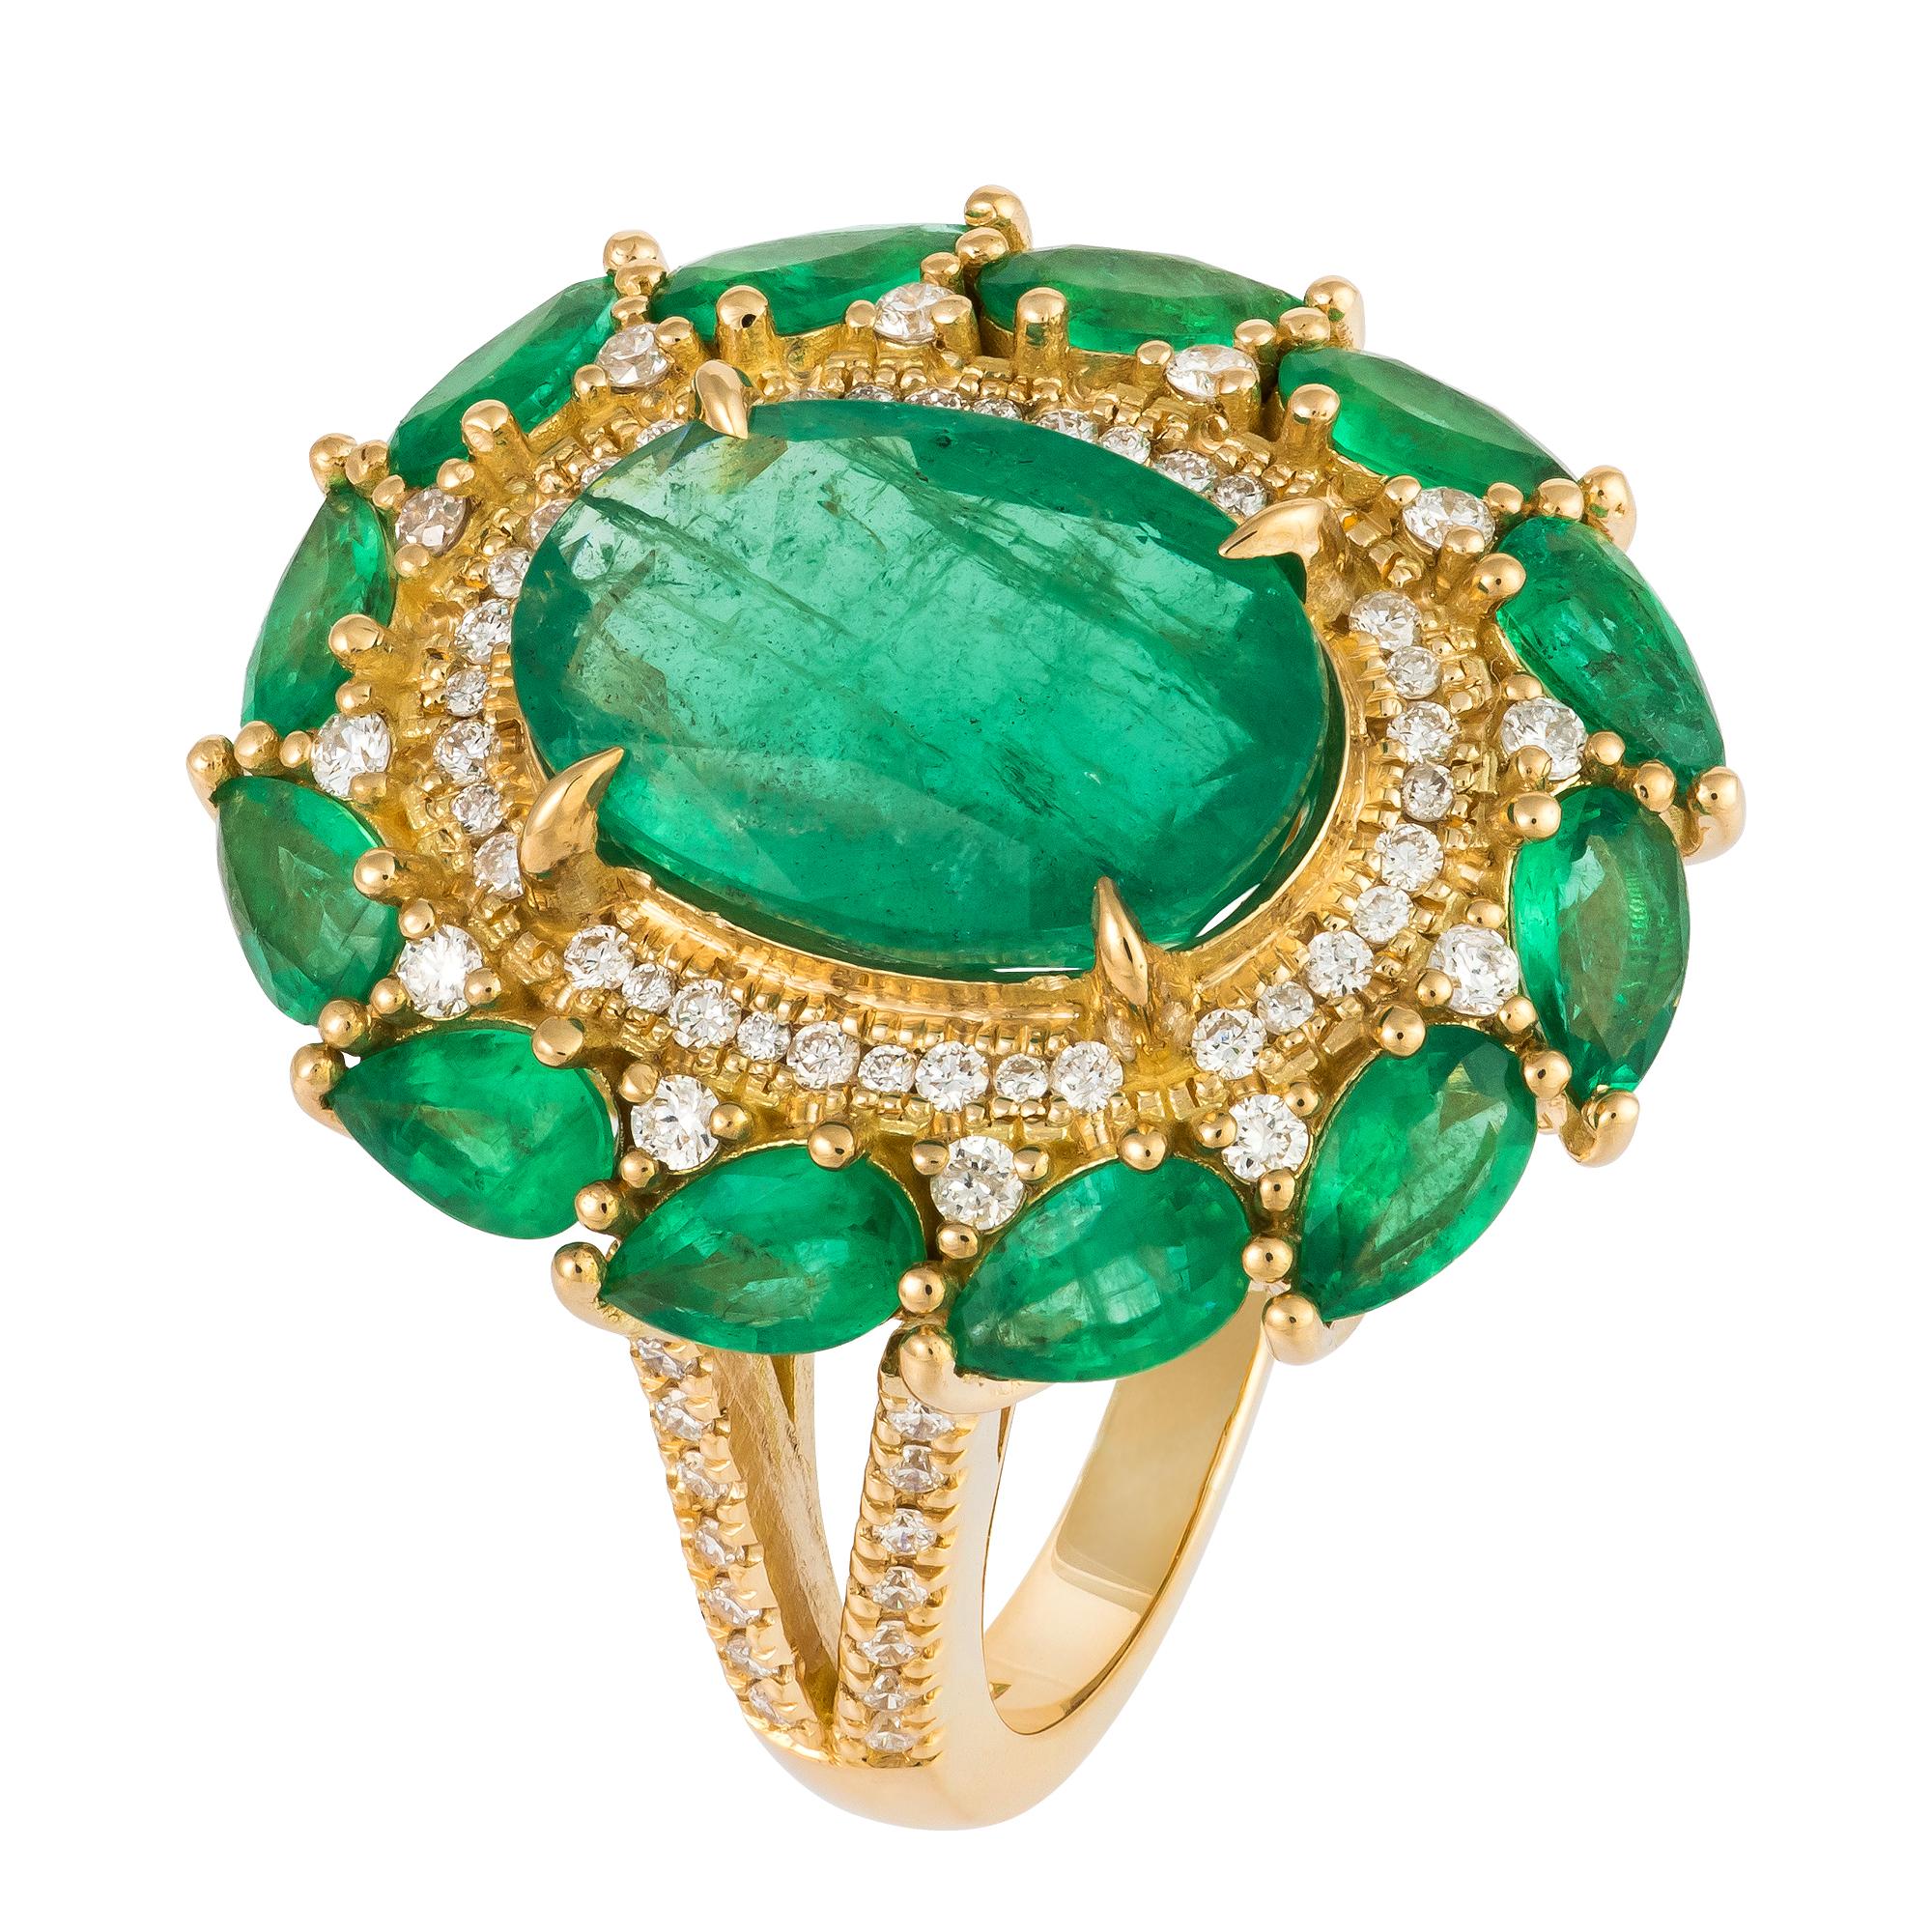 For Sale:  Impressive Yellow 18K Gold Emerald White Diamond Ring For Her 4